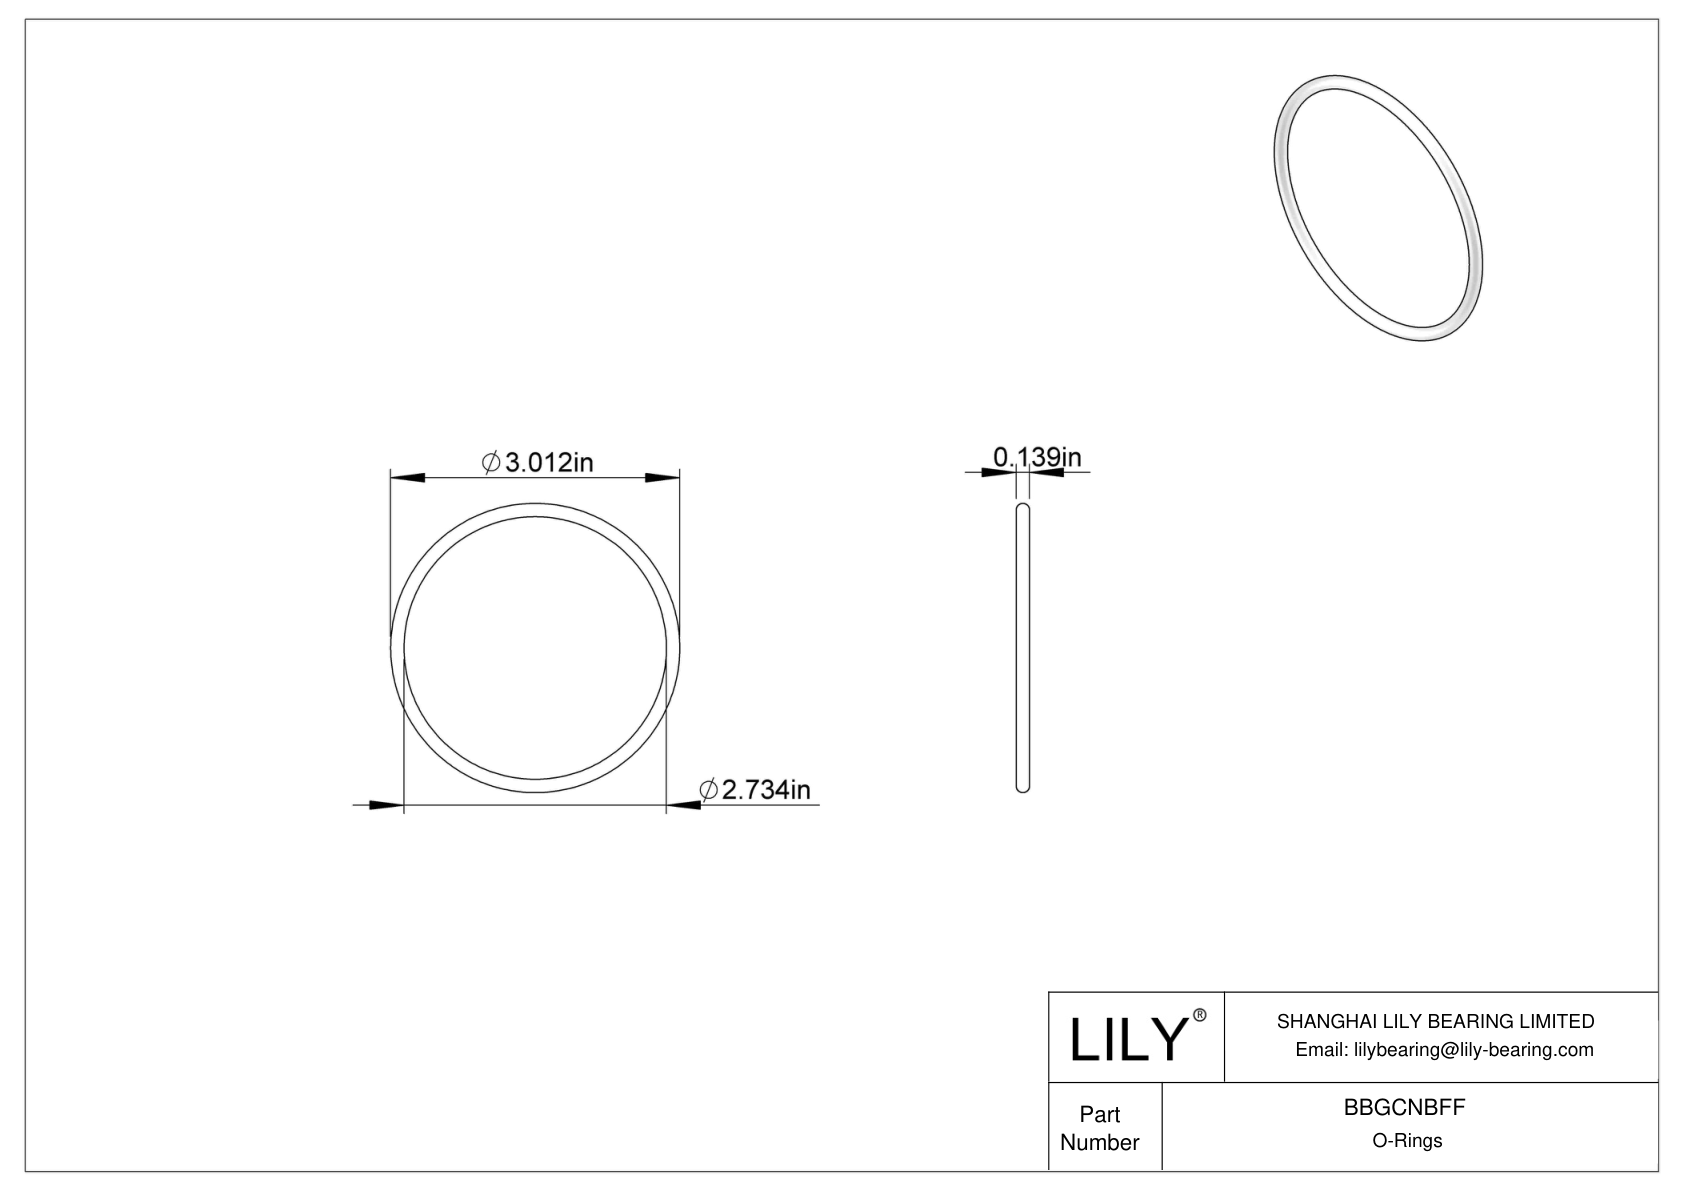 BBGCNBFF High Temperature O-Rings Round cad drawing